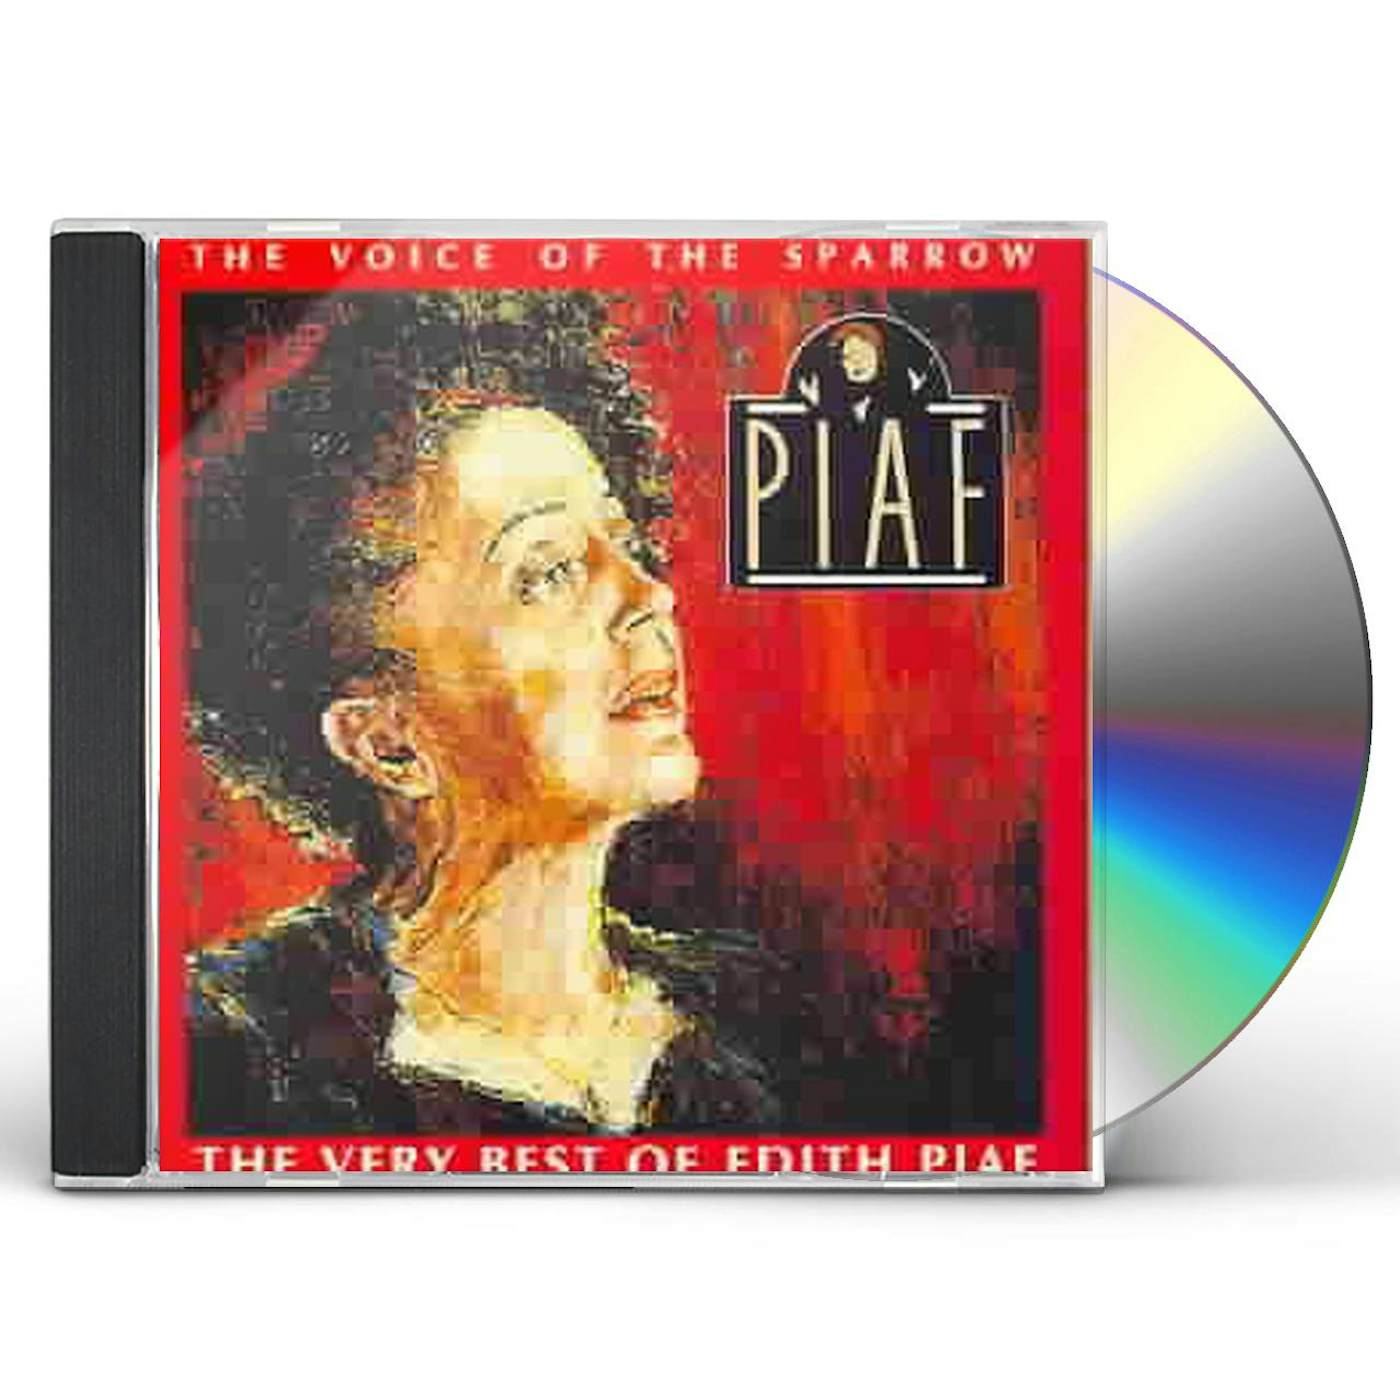 VOICE OF THE SPARROW: VERY BEST OF Édith Piaf CD